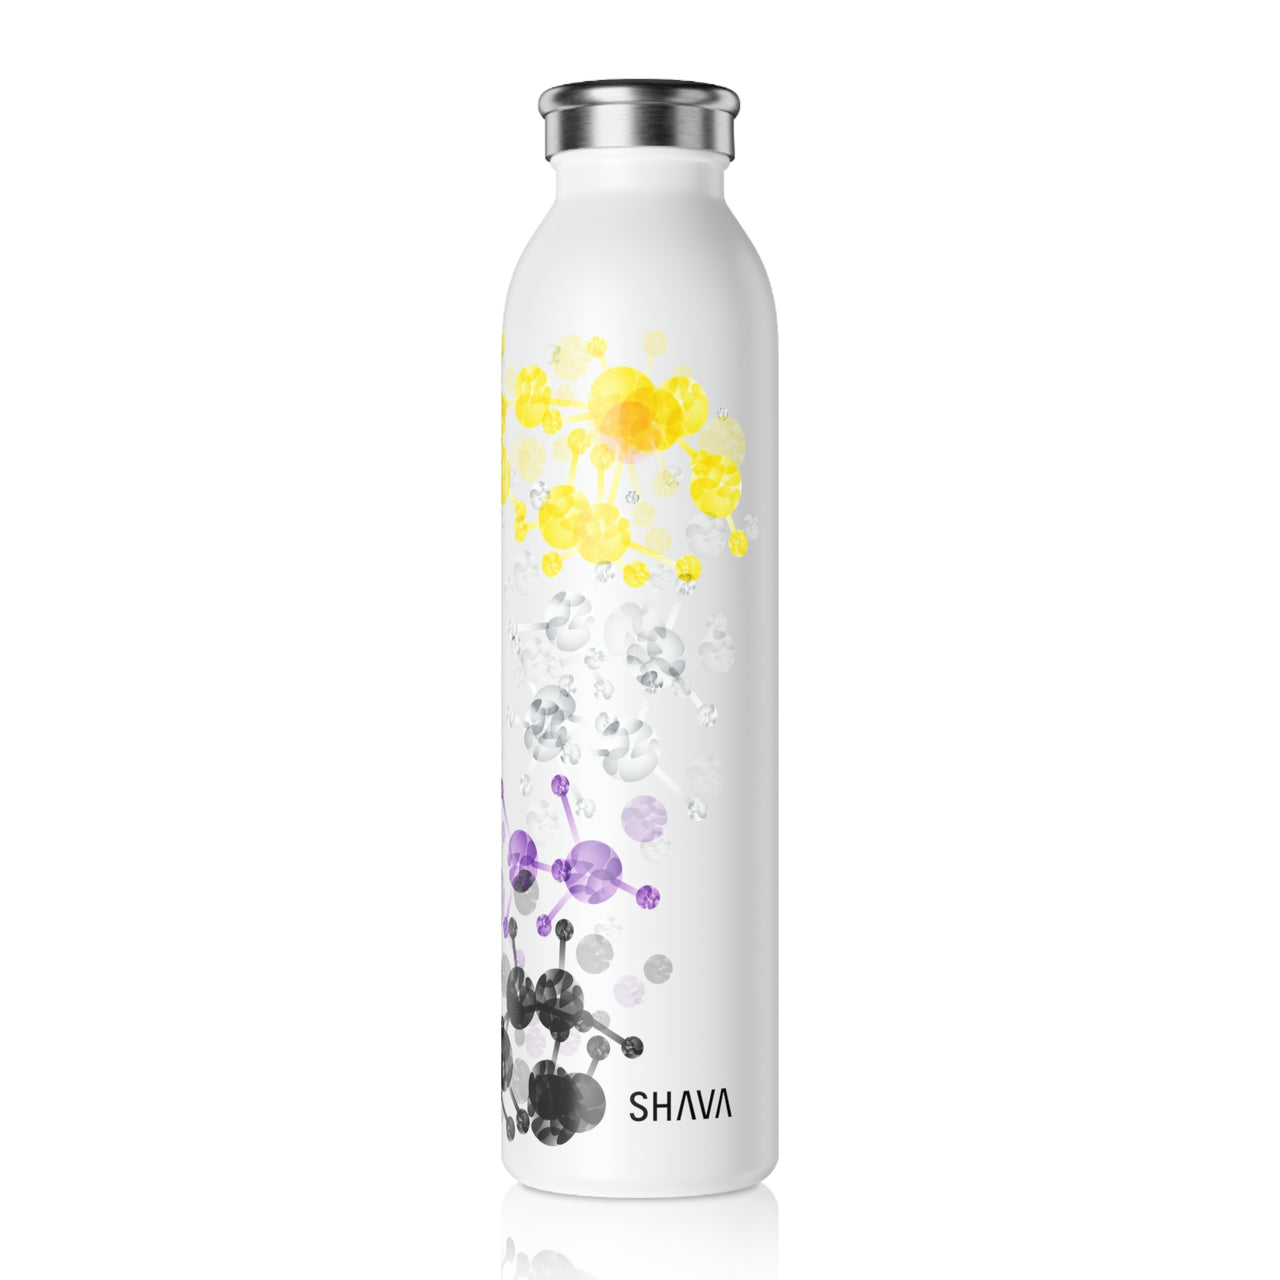 Nonbinary Flag Slim Water Bottle San Francisco Pride - My Rainbow is In My DNA SHAVA CO